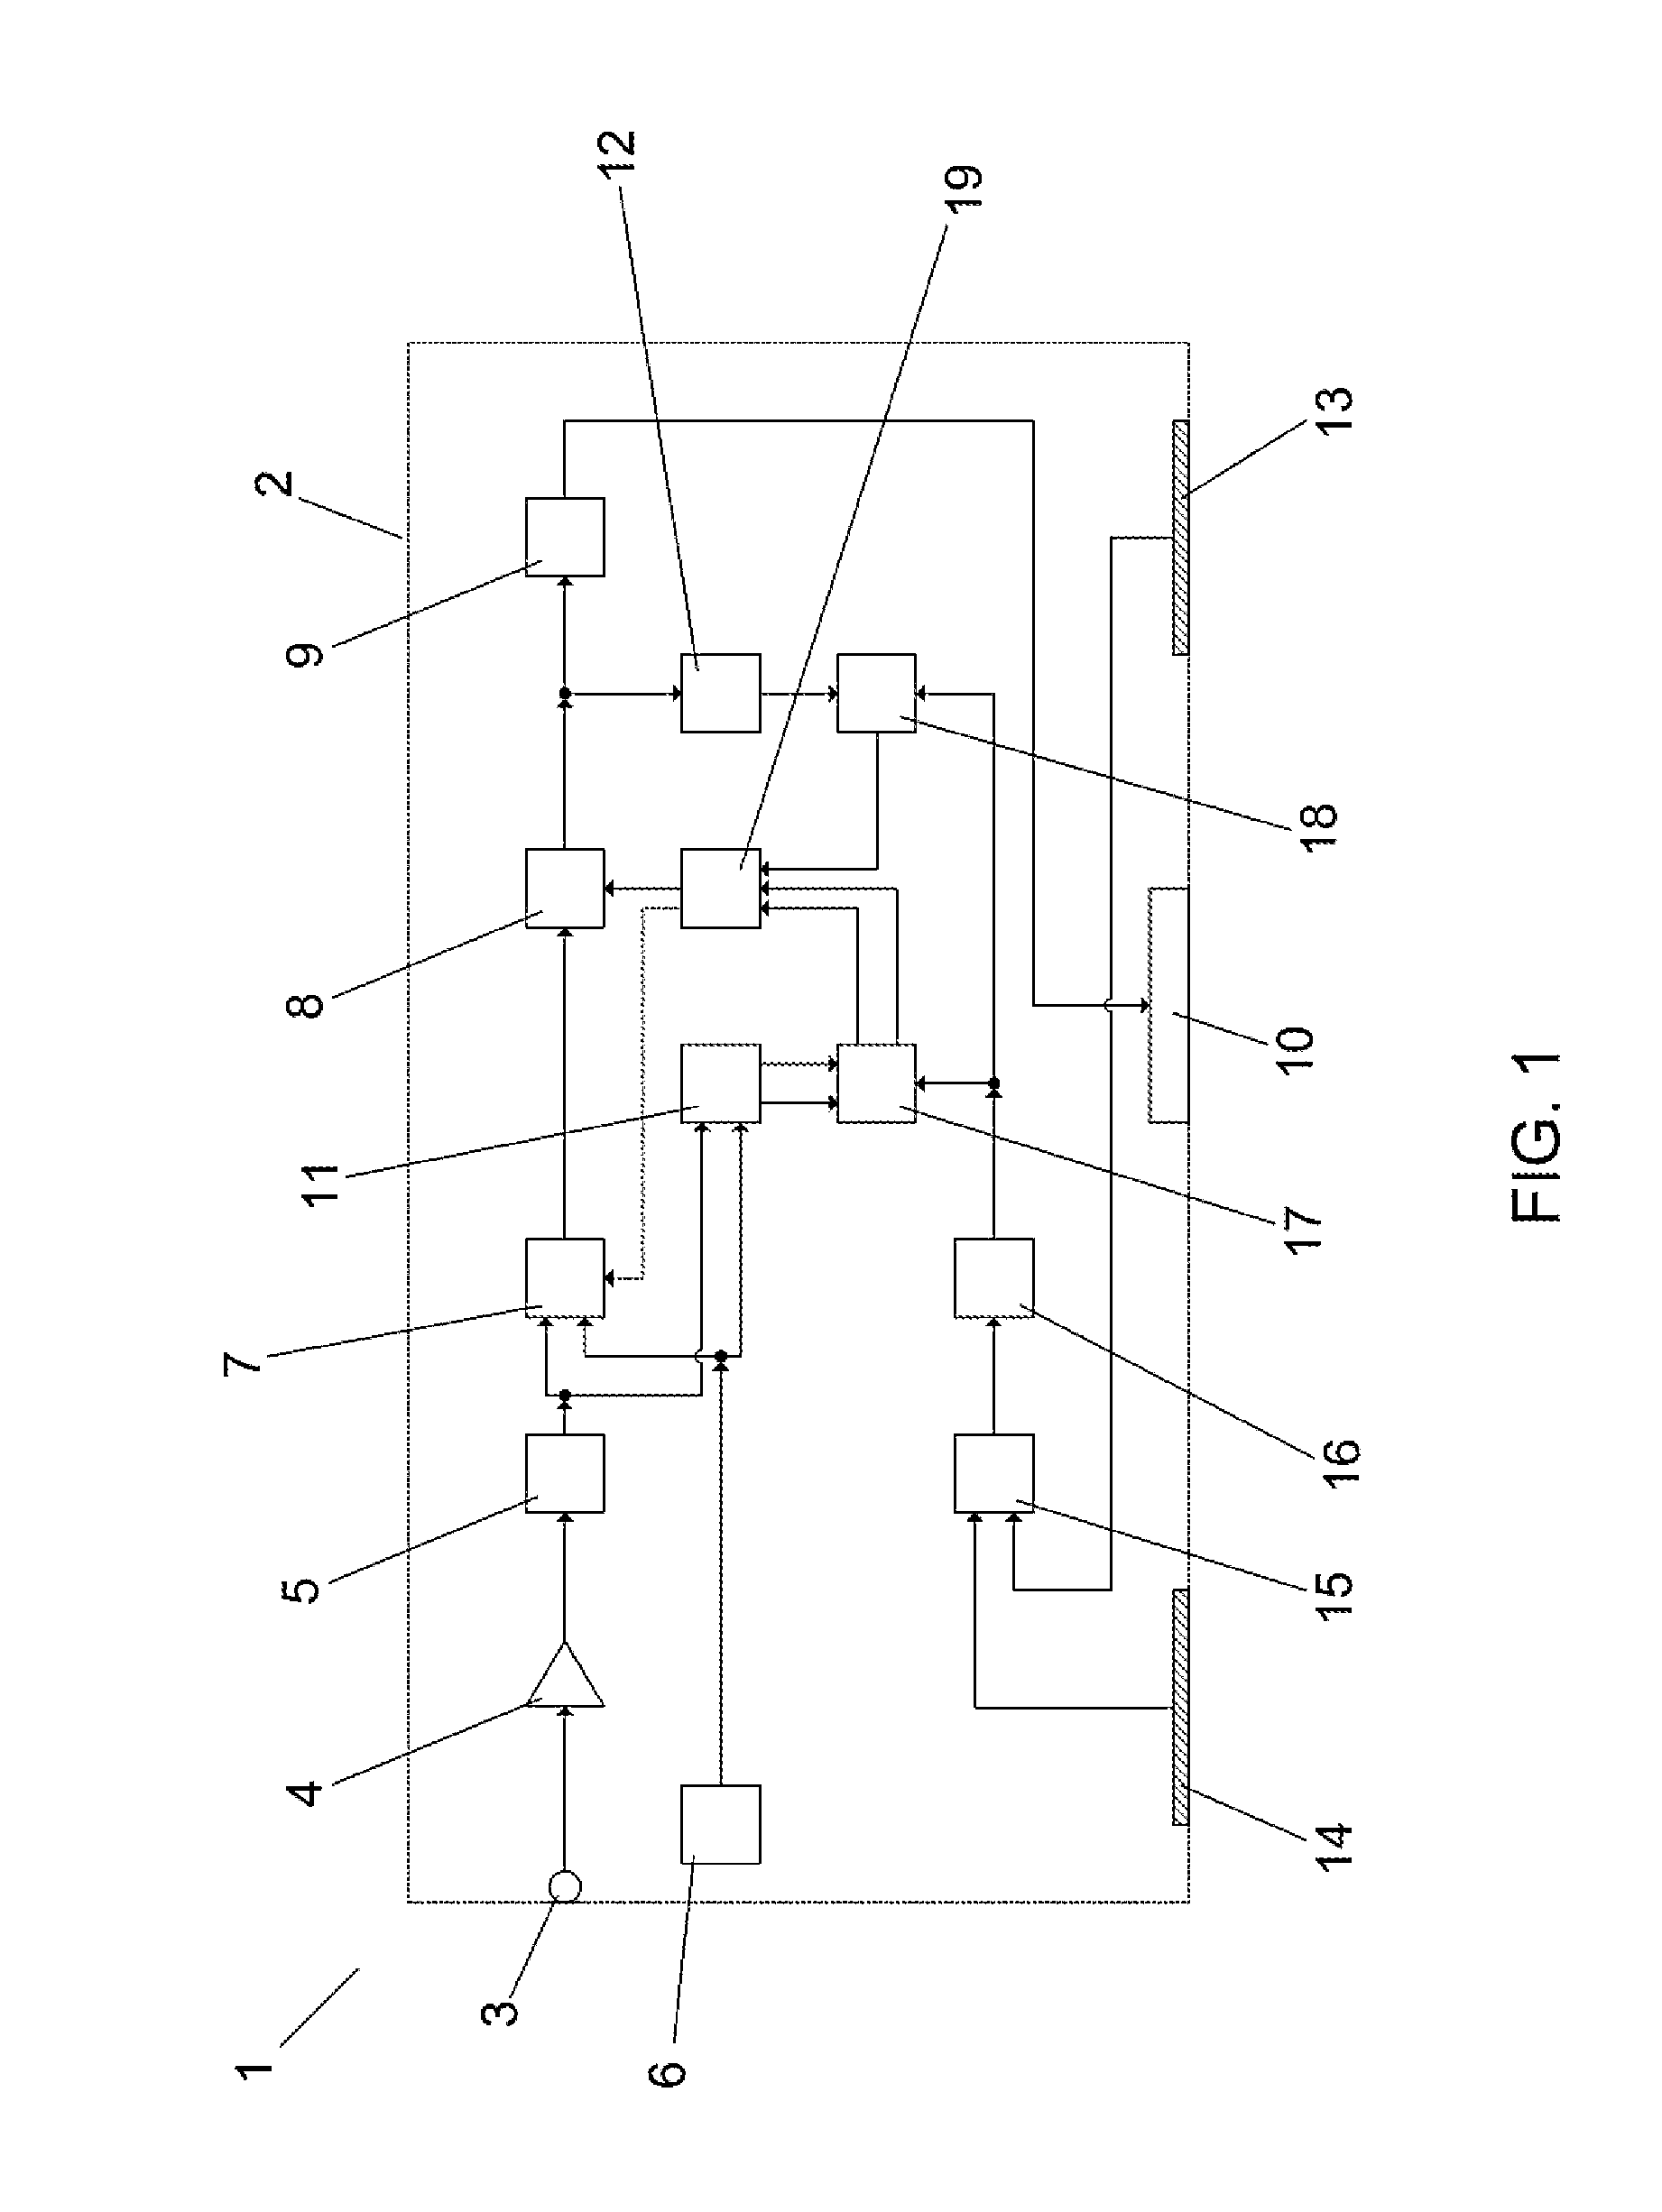 Hearing device with brainwave dependent audio processing